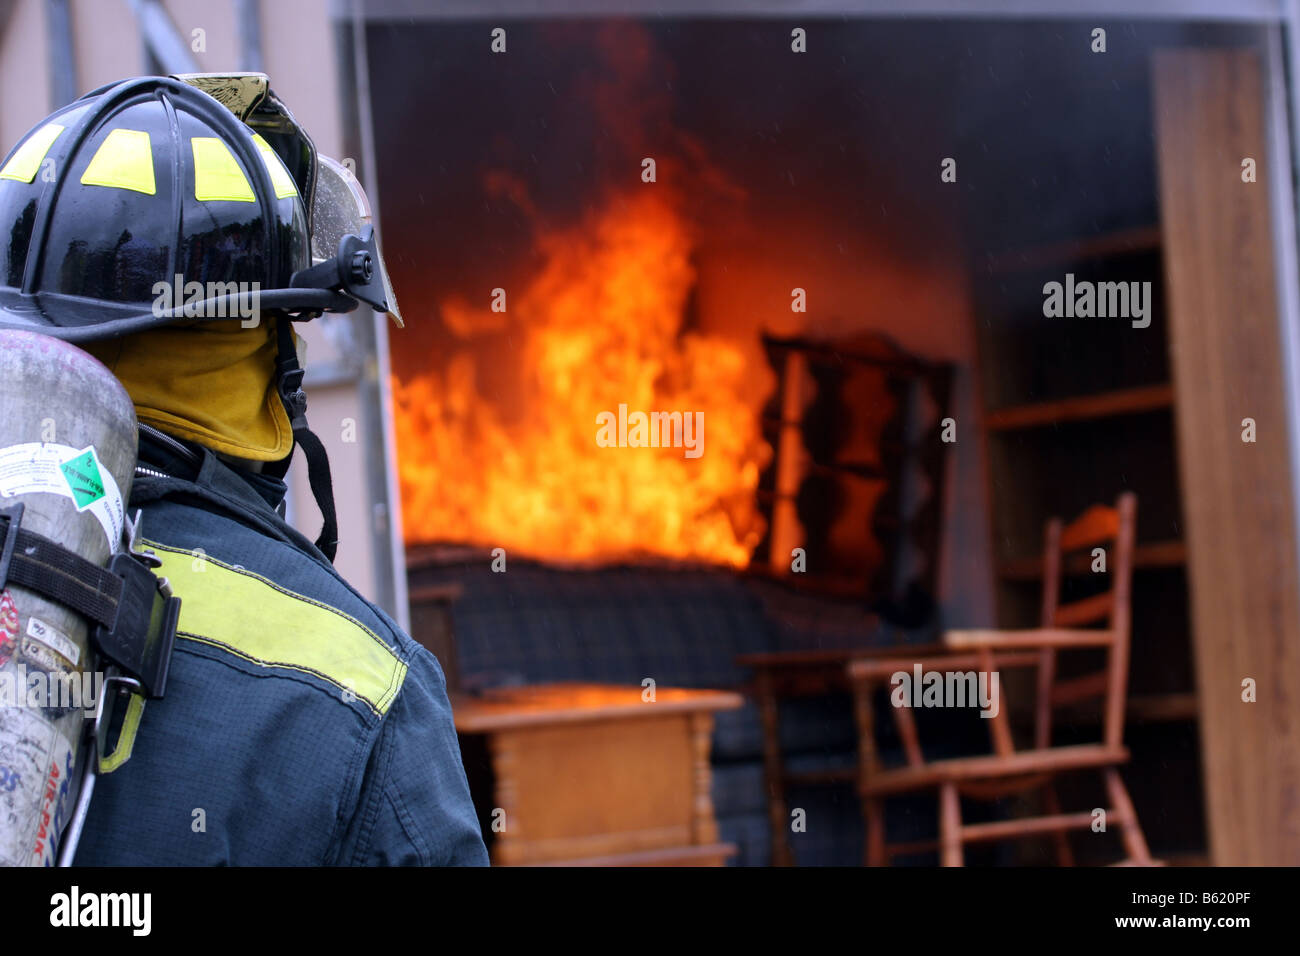 A fire fighter ready to fight a fire in a container full of furniture Stock Photo